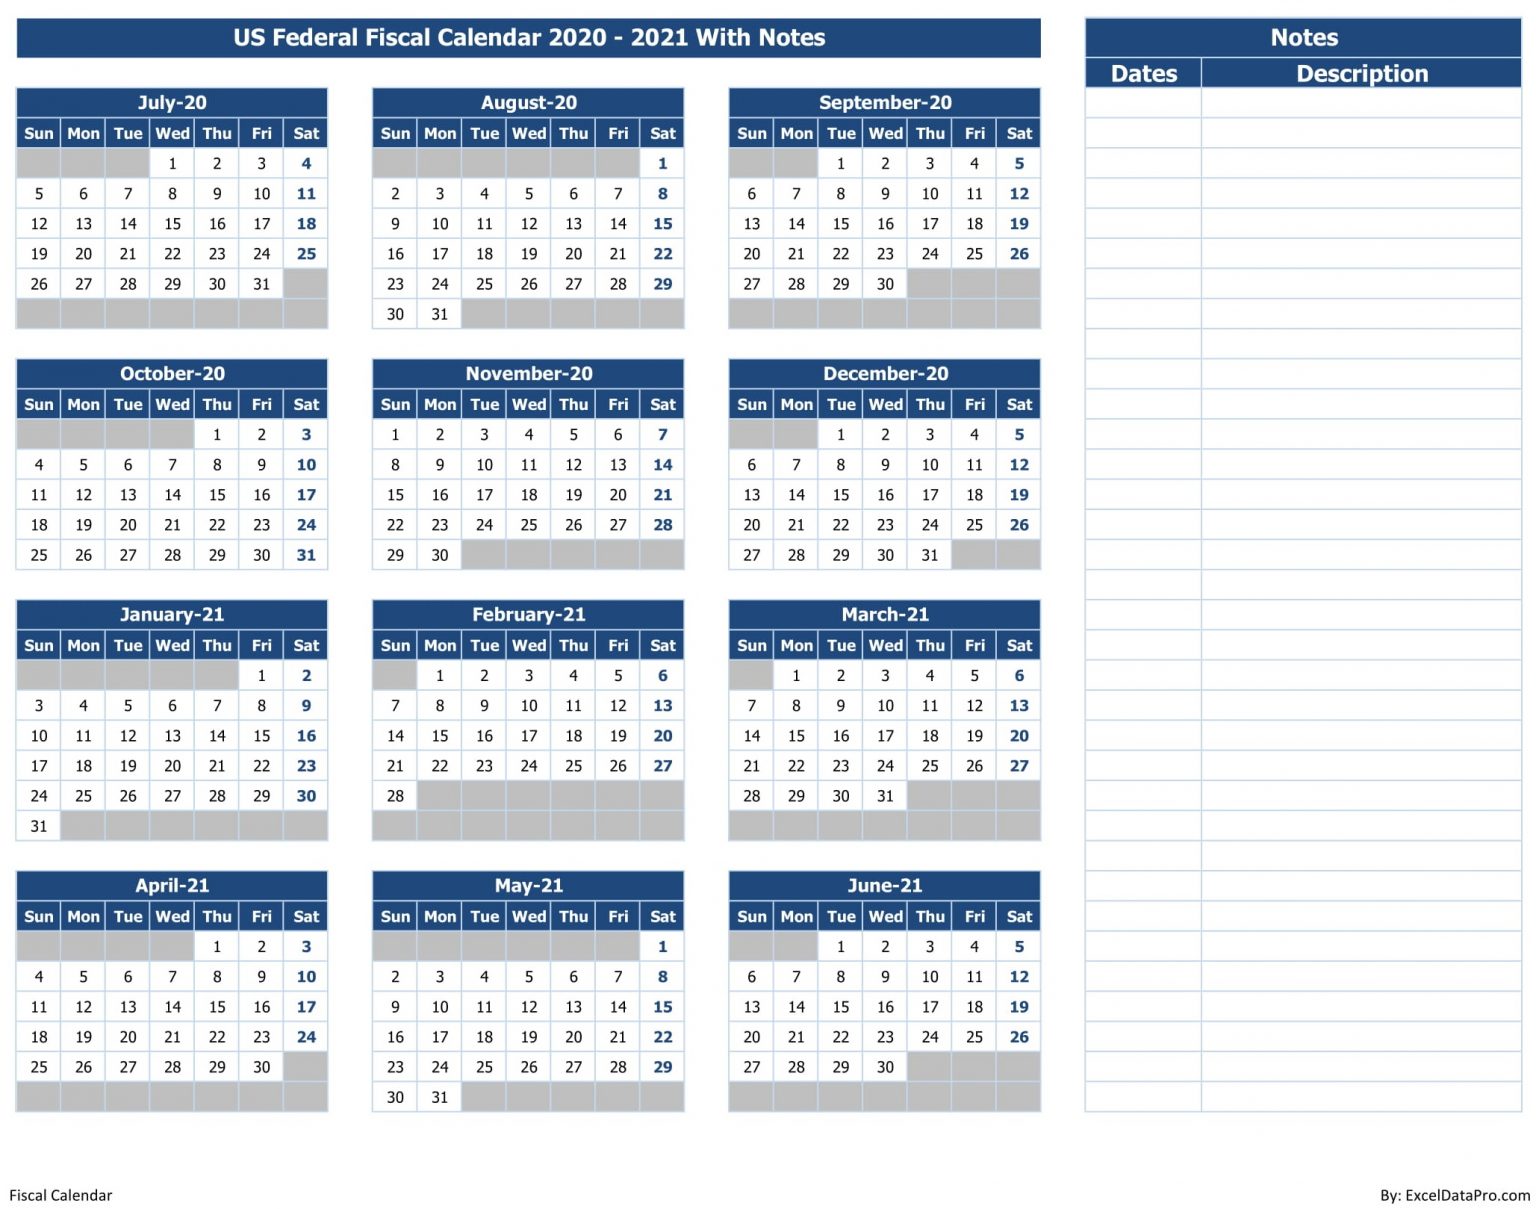 Download US Federal Fiscal Calendar 2020-21 With Notes Excel Template ...